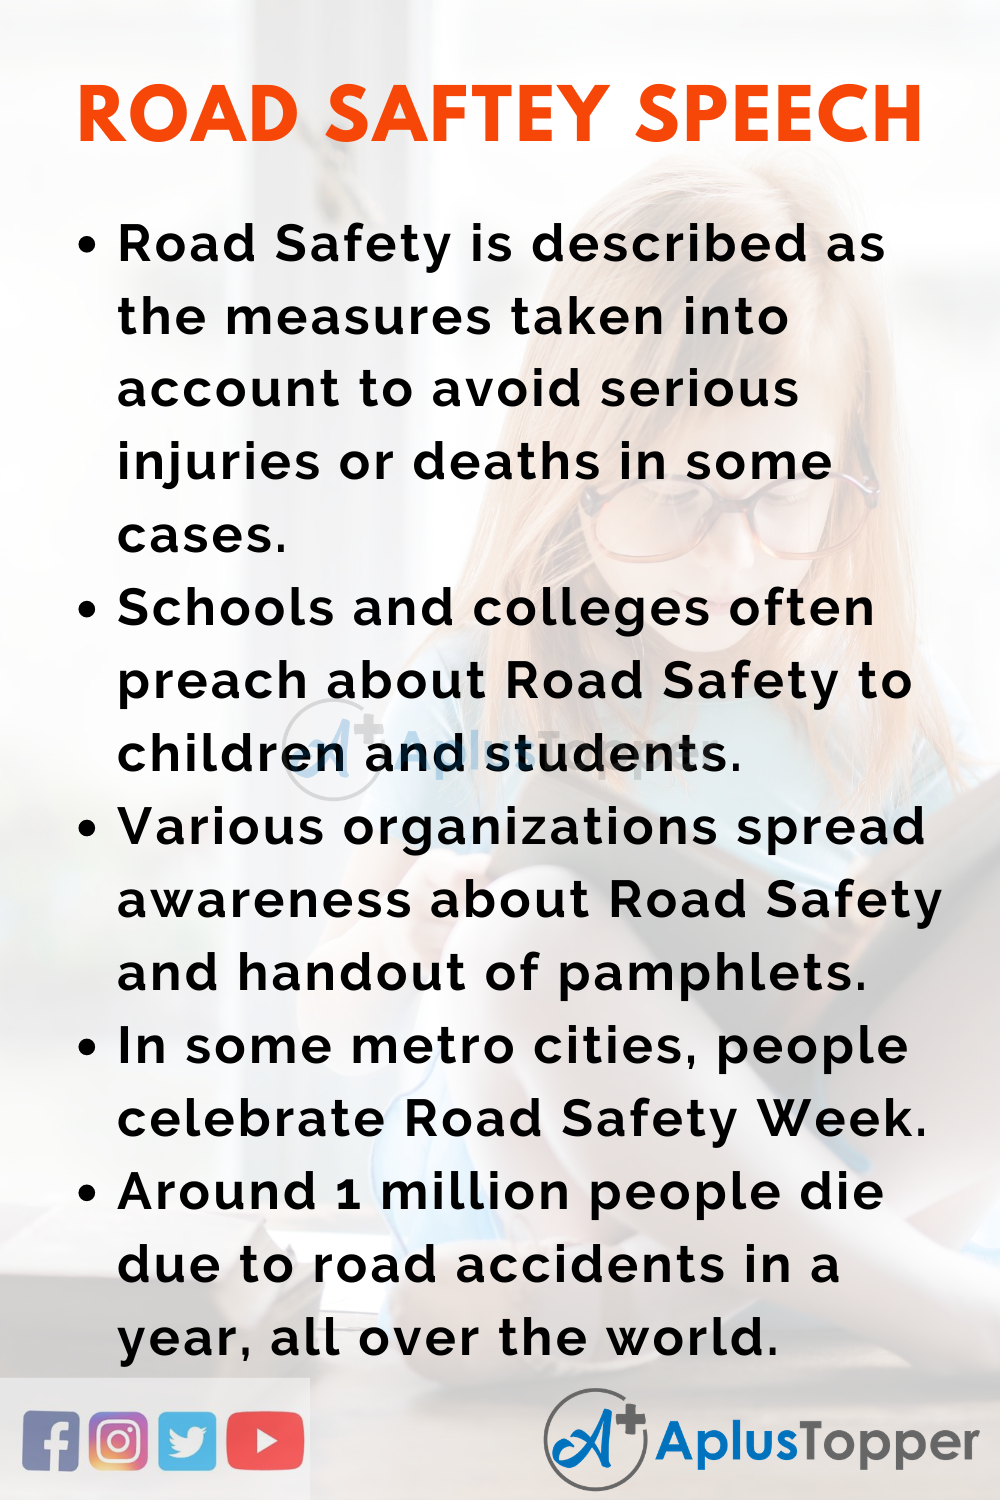 speech on road safety in 200 words